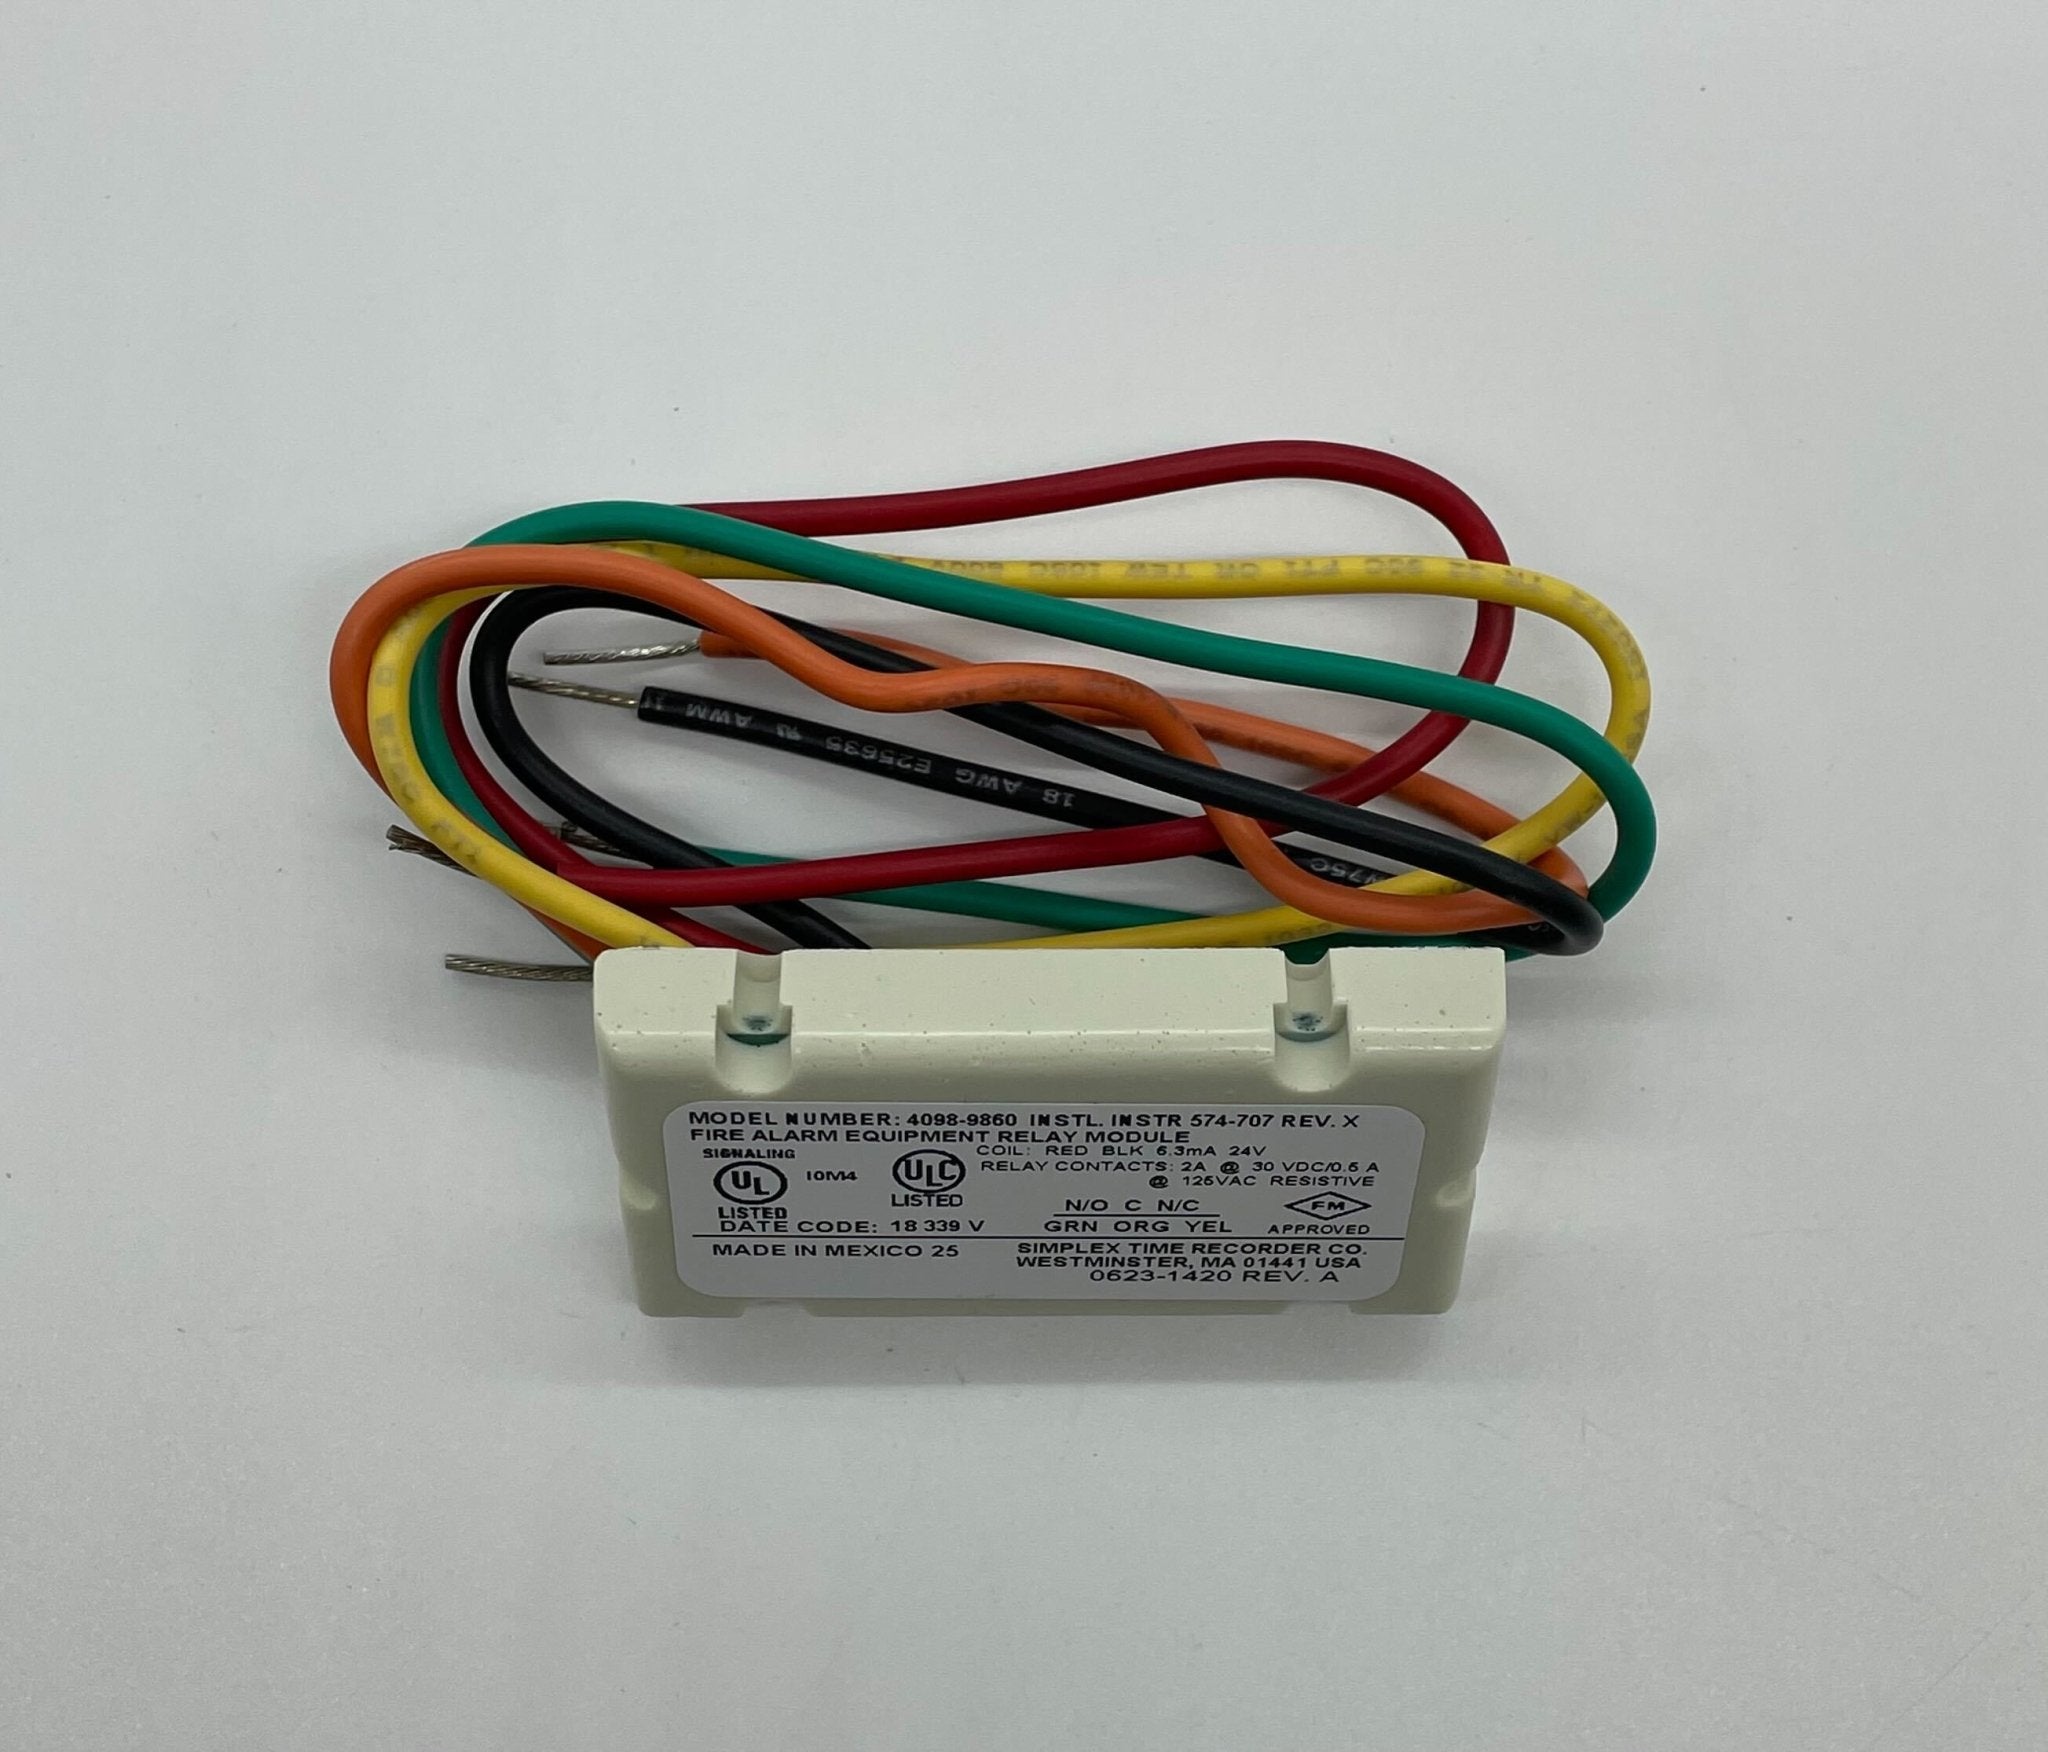 Simplex 4098-9860 2-Wire Relay For 4098-9780 - The Fire Alarm Supplier